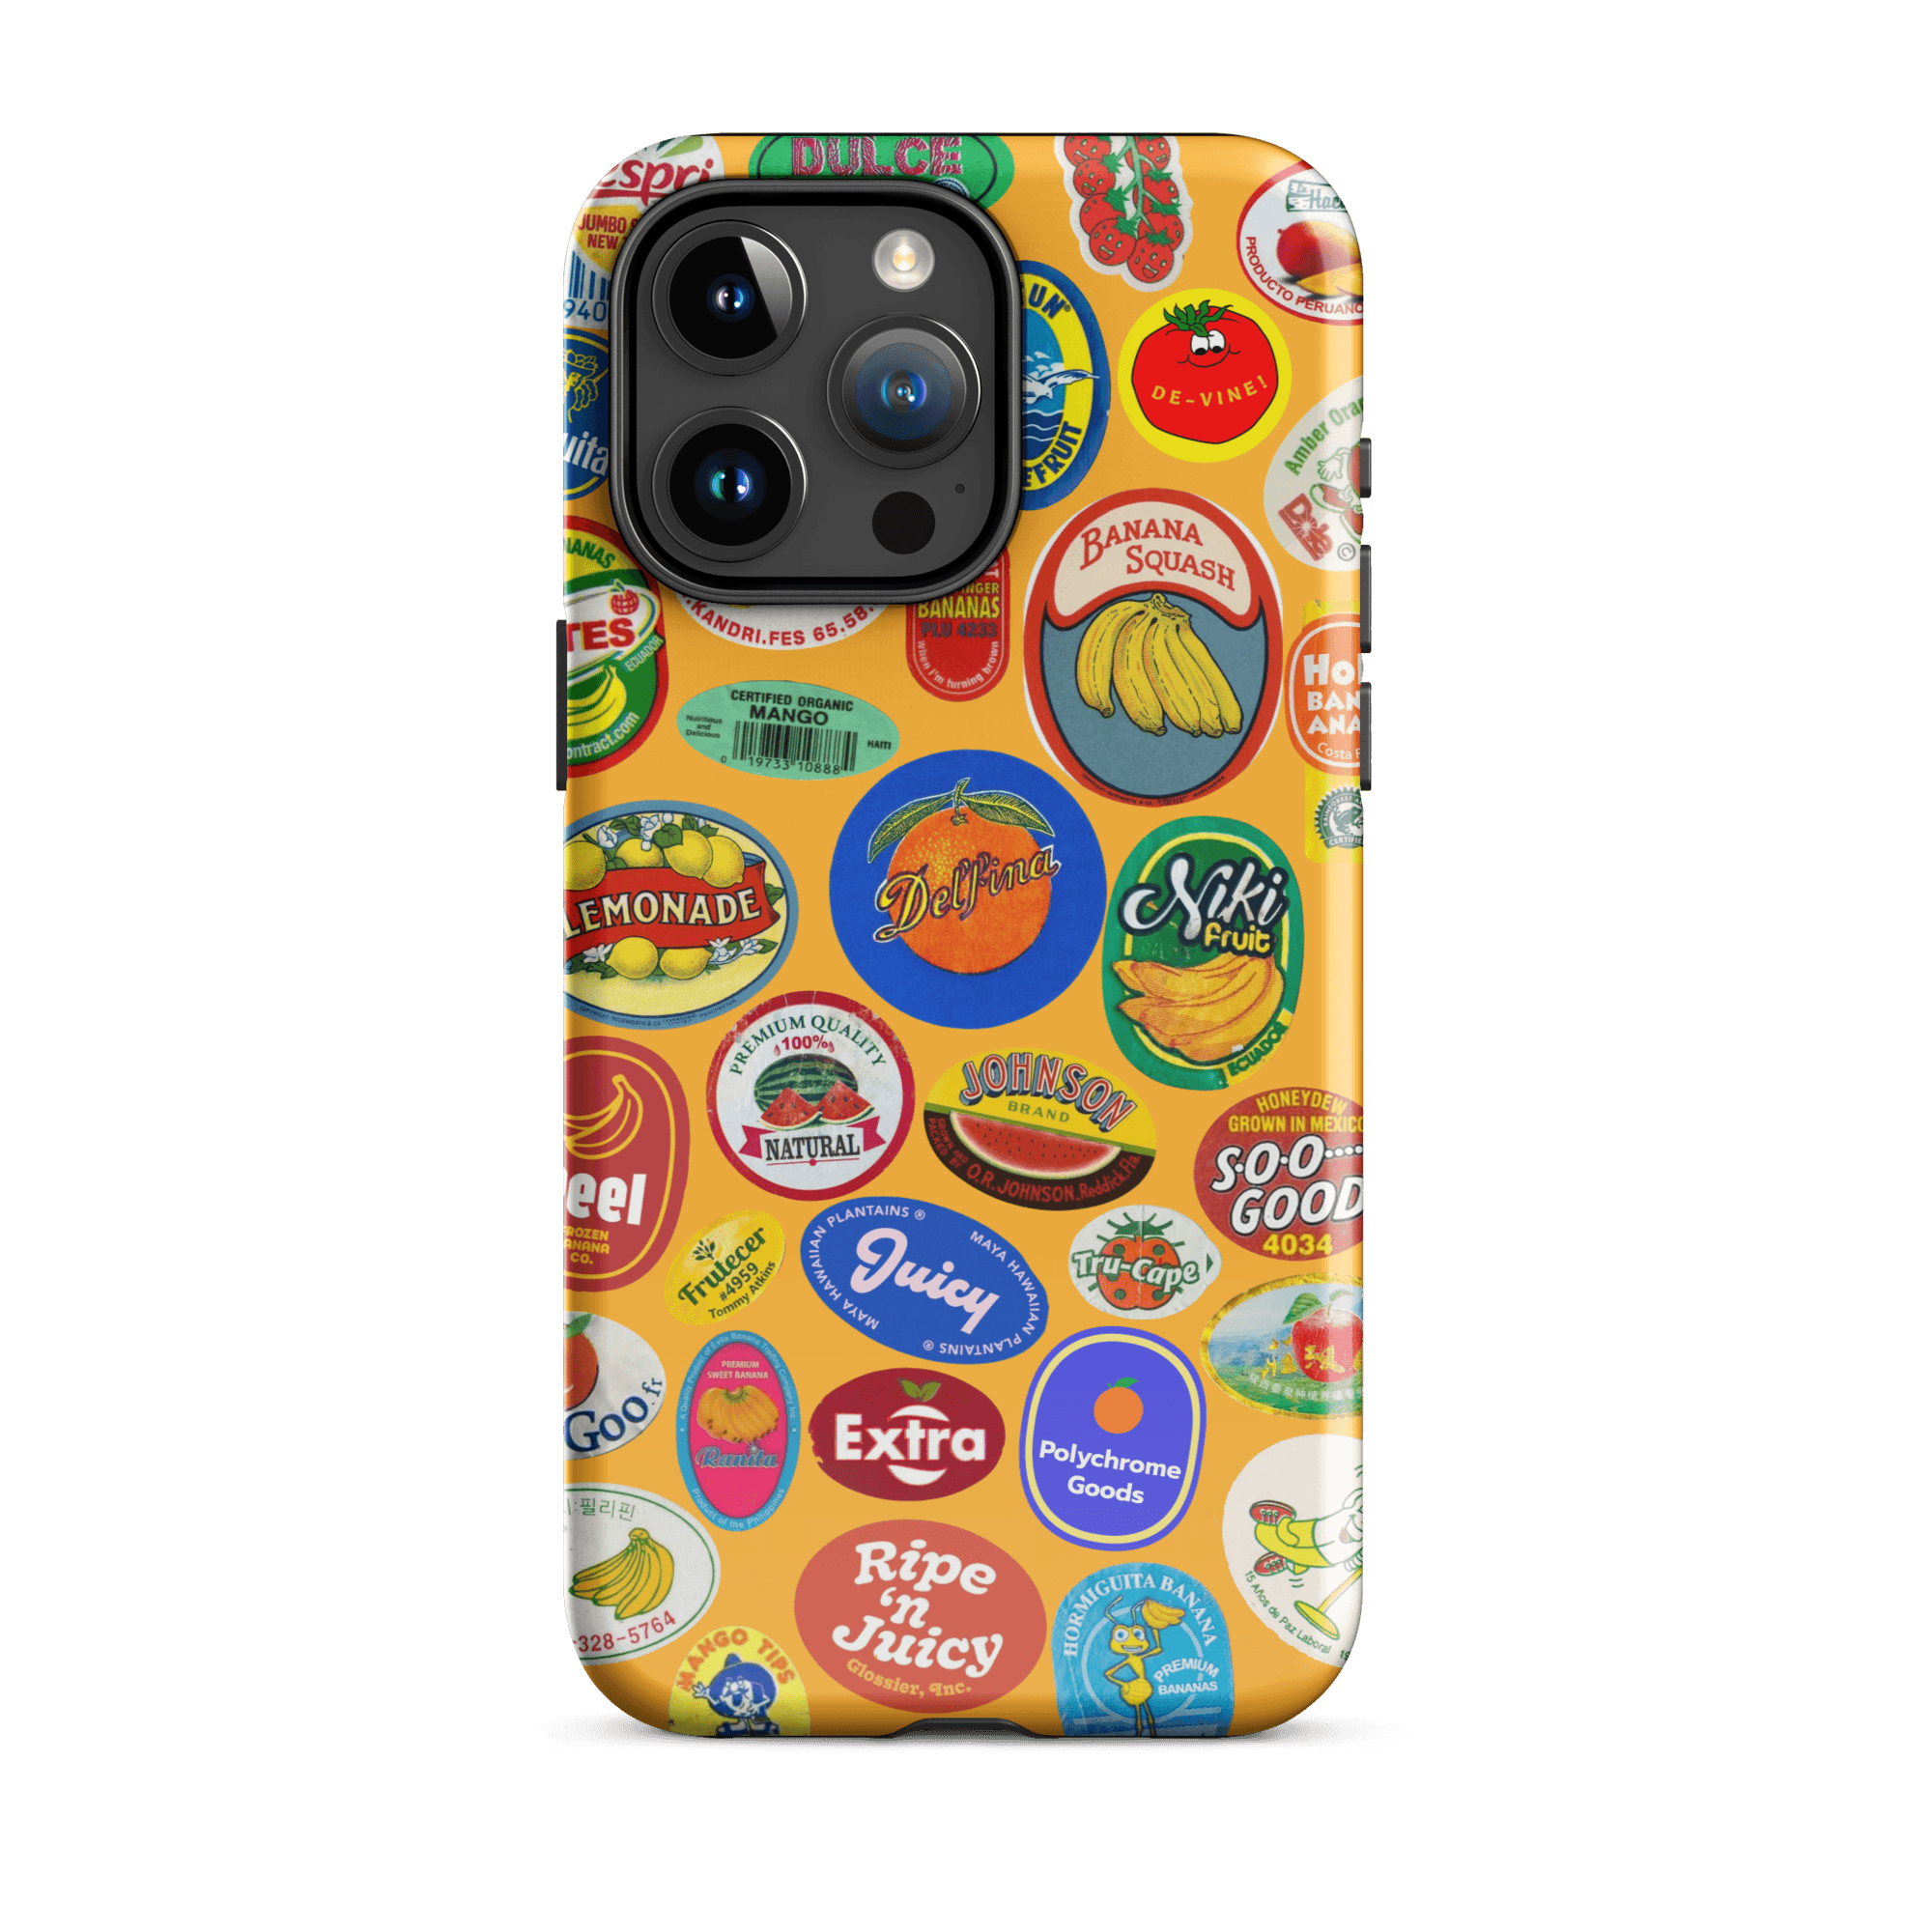 Fruit Stickers 🍊🍒🍋🍍🍏 Phone Case for iPhone (Orange Background) - Polychrome Goods 🍊